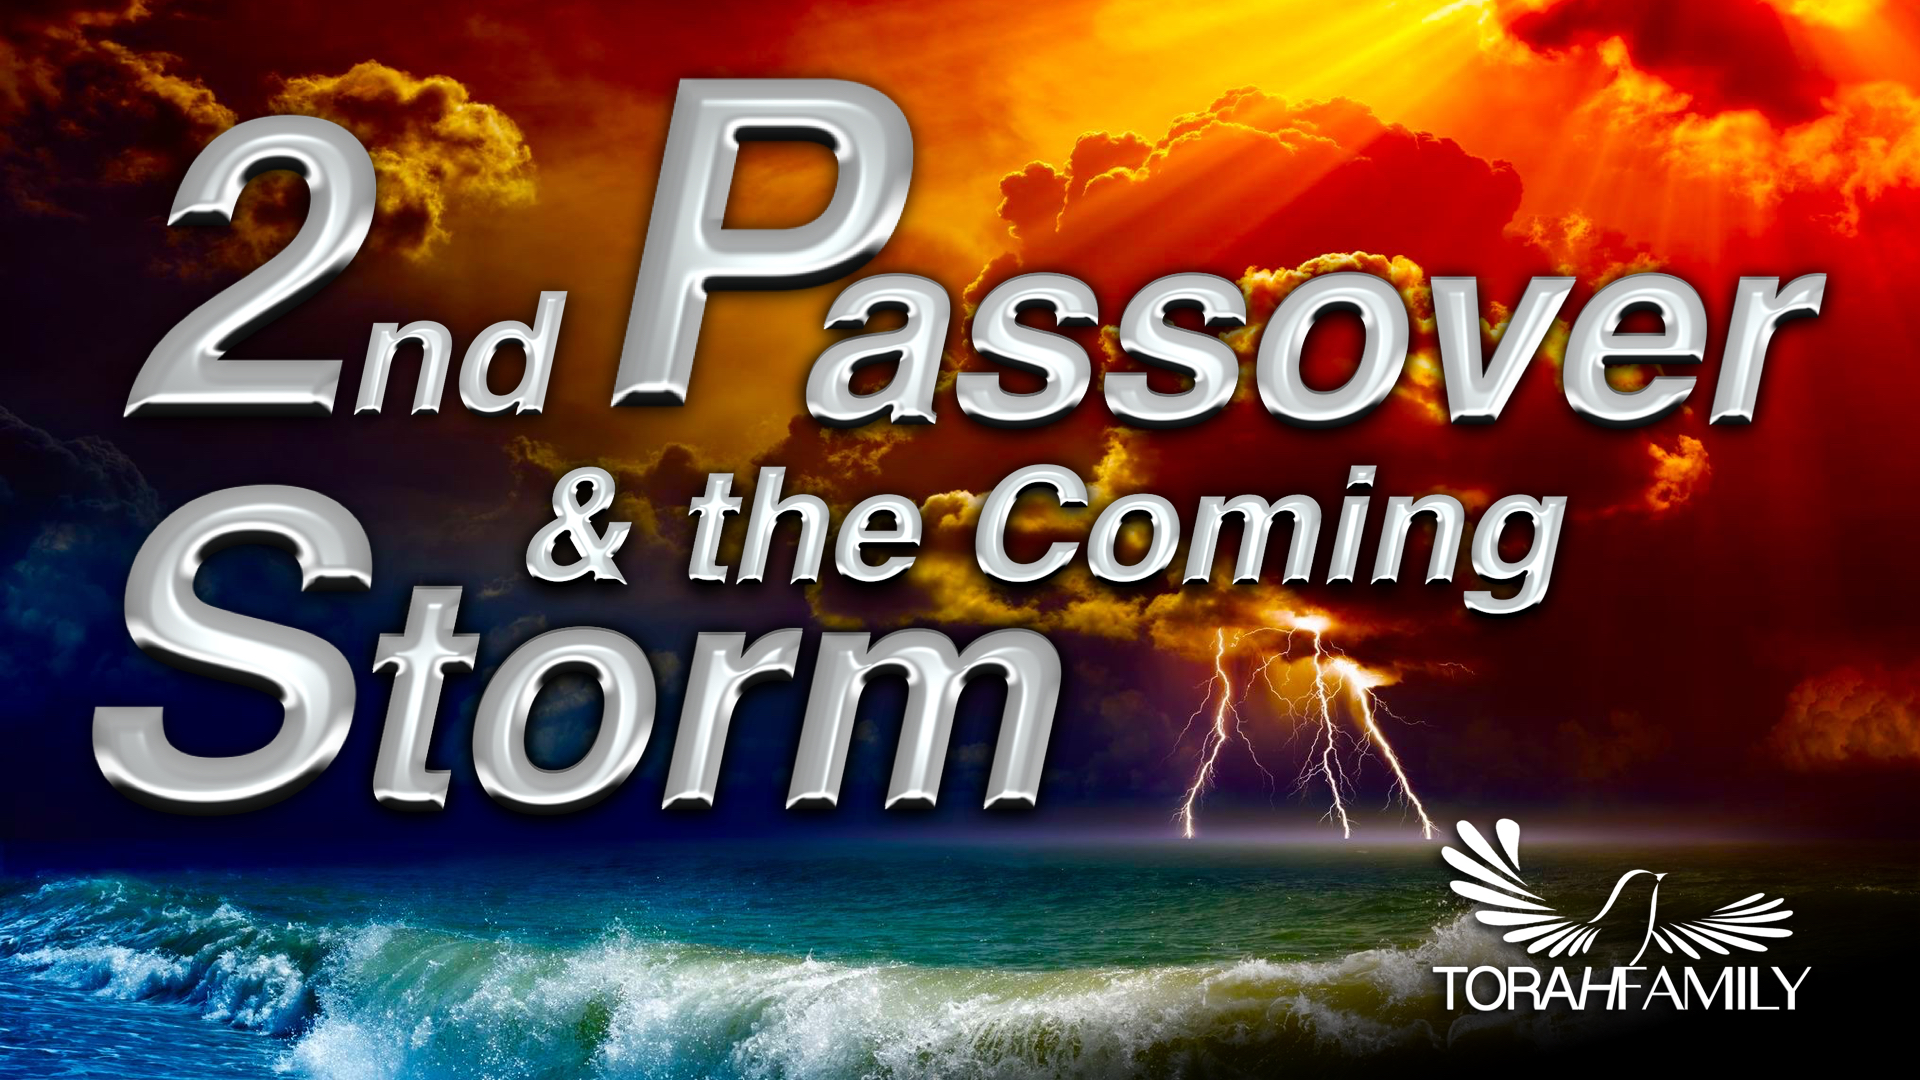 2nd Passover and the Coming Storm Torah Family